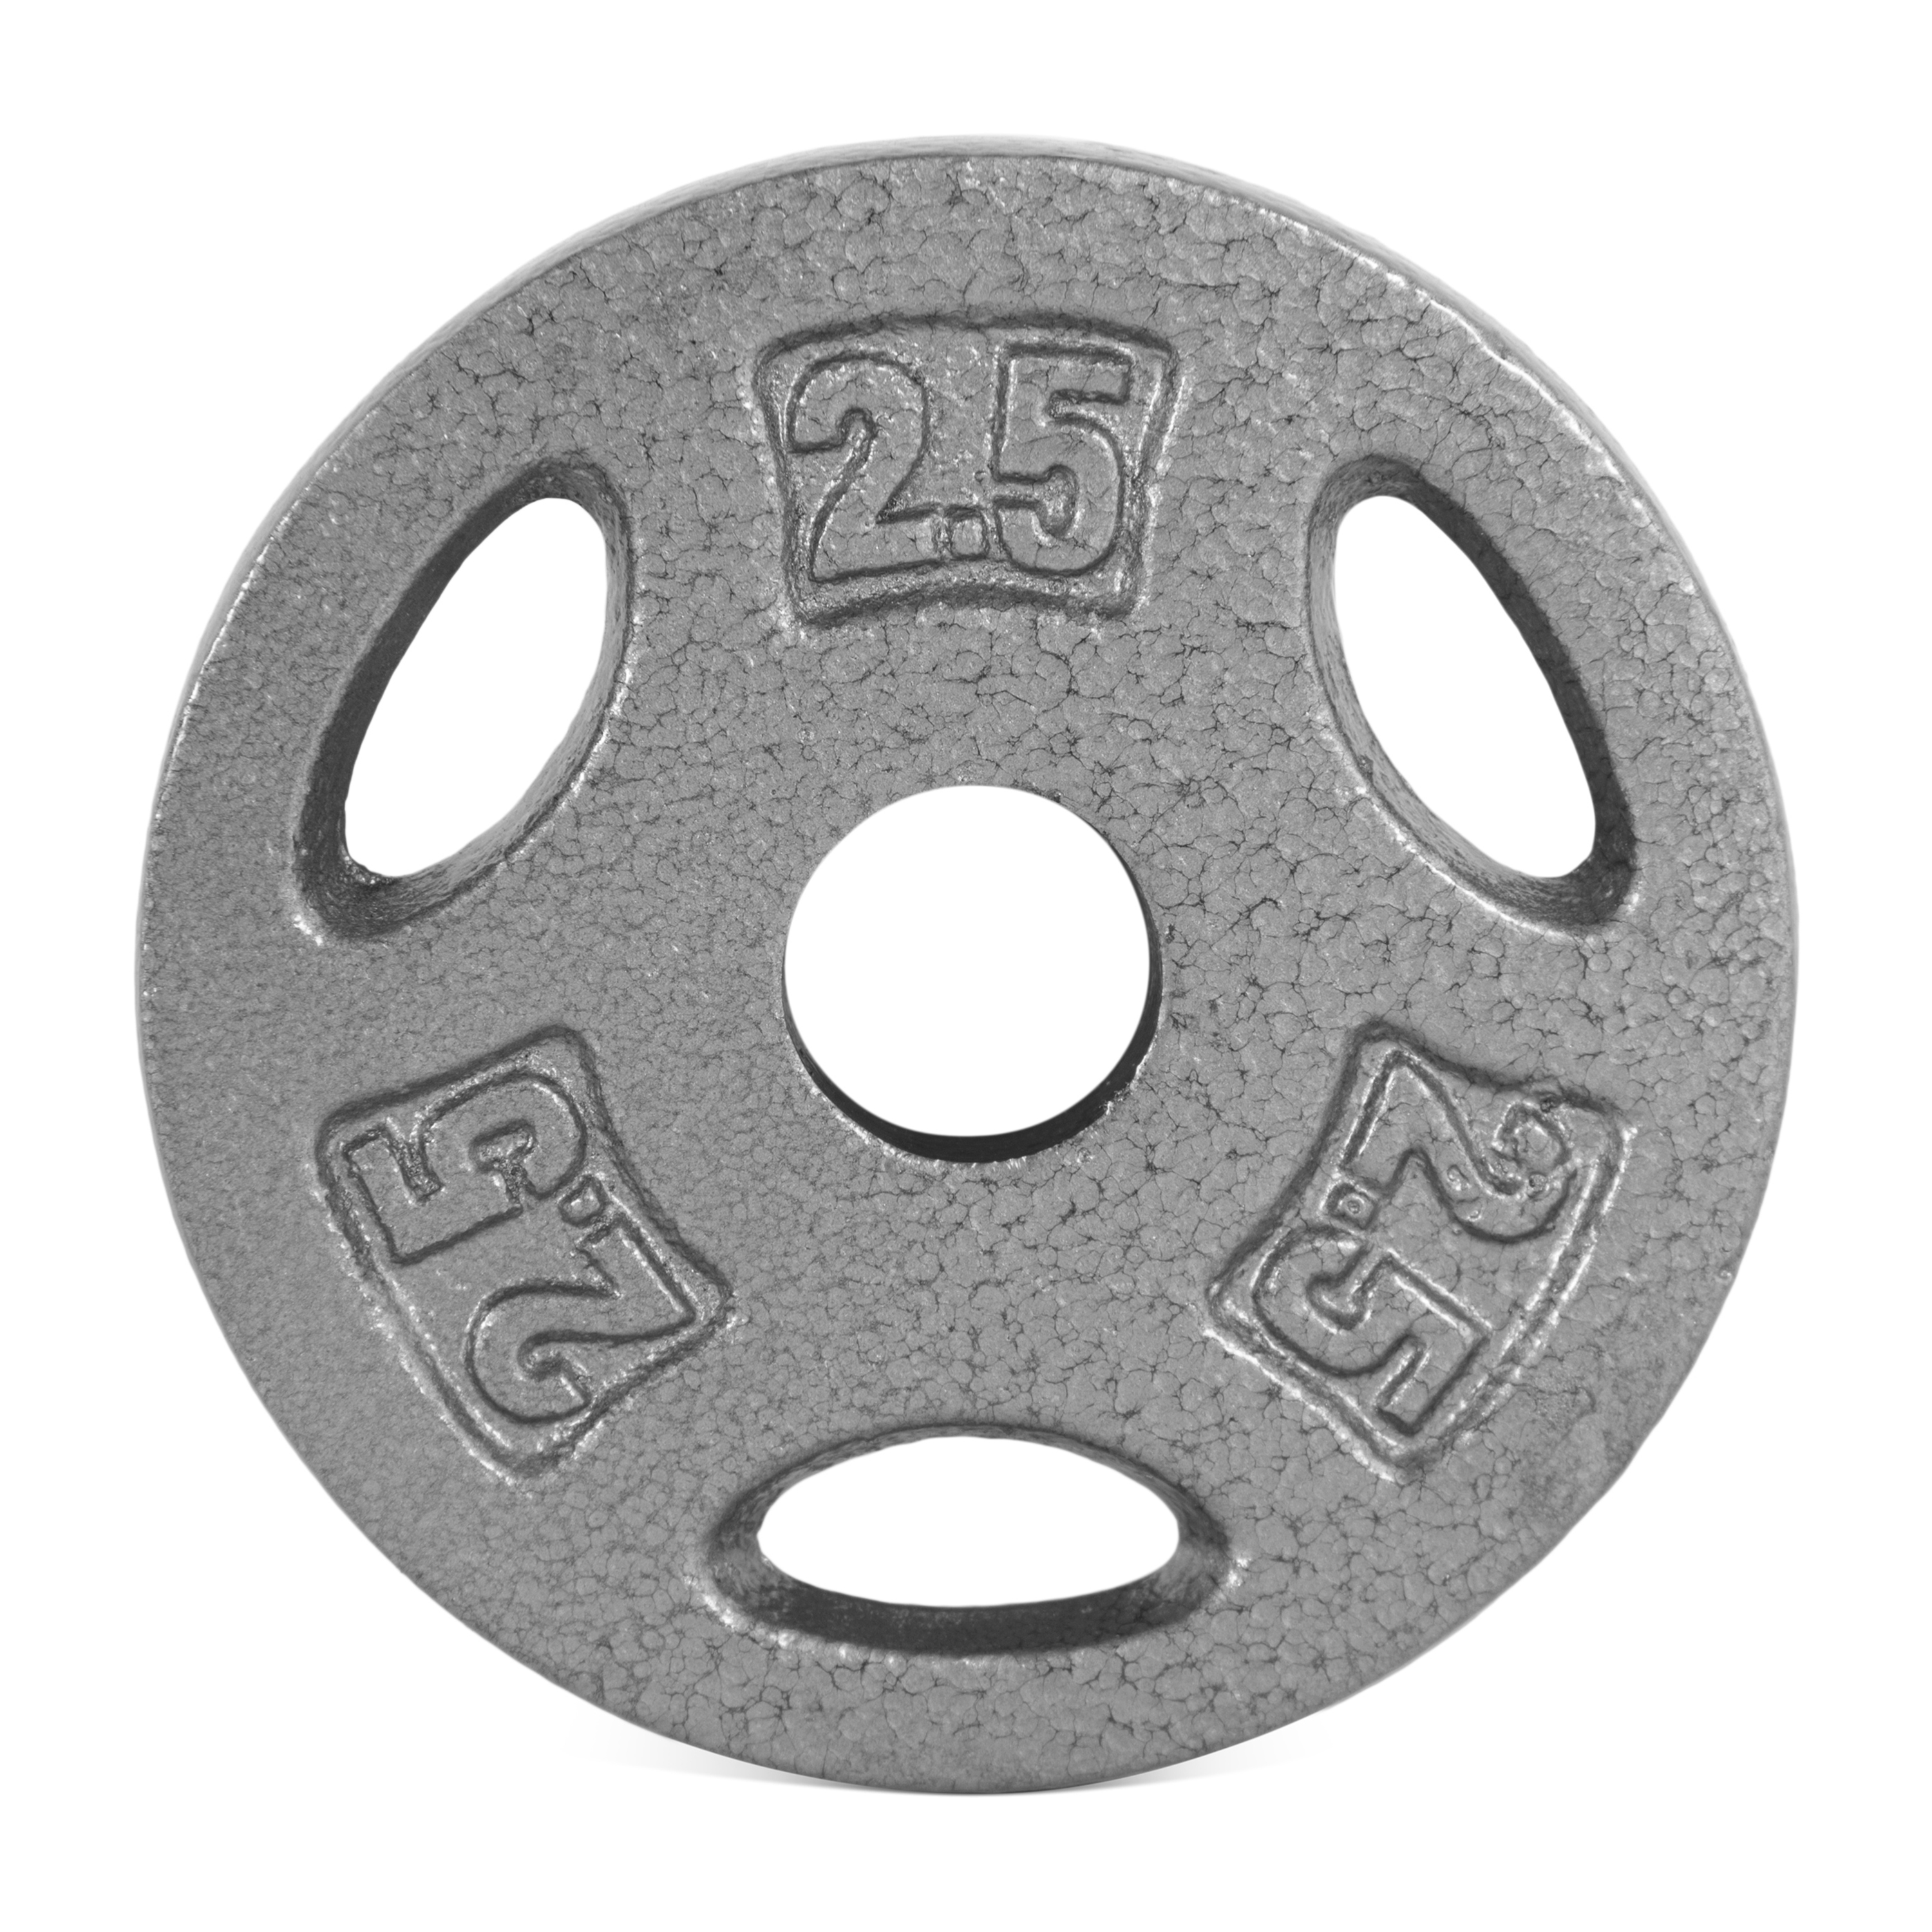 CAP Barbell Standard Weight Lifting Plate, 2.5 lbs, Single - image 1 of 3